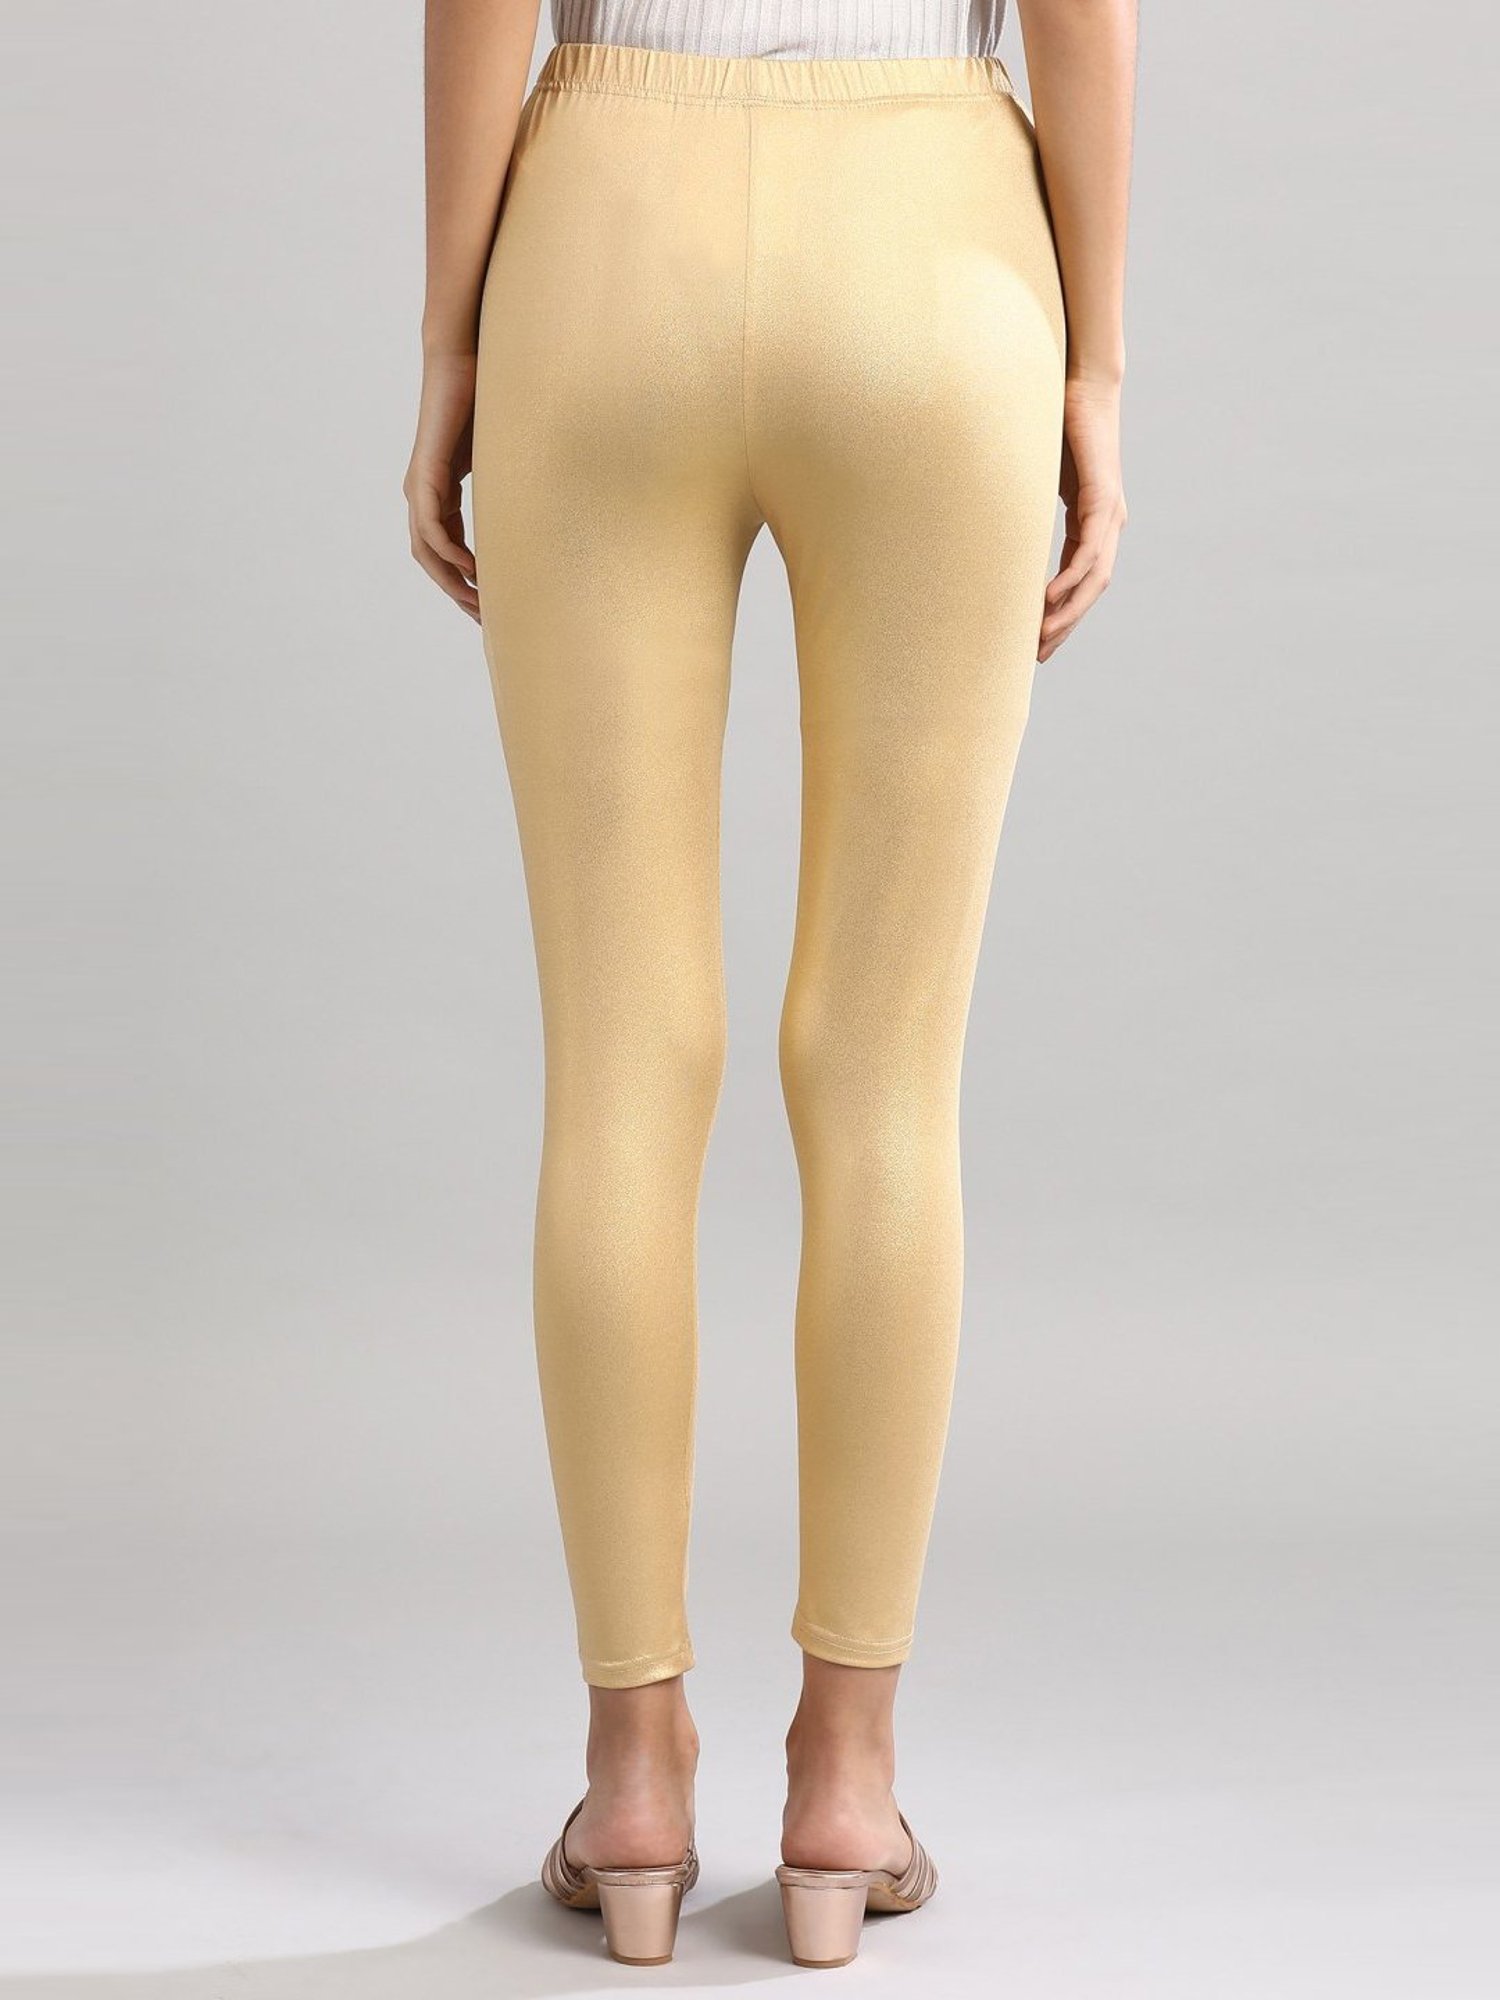 Aurelia- Red and Gold Metallic  Leggings for Sale by adel8ide